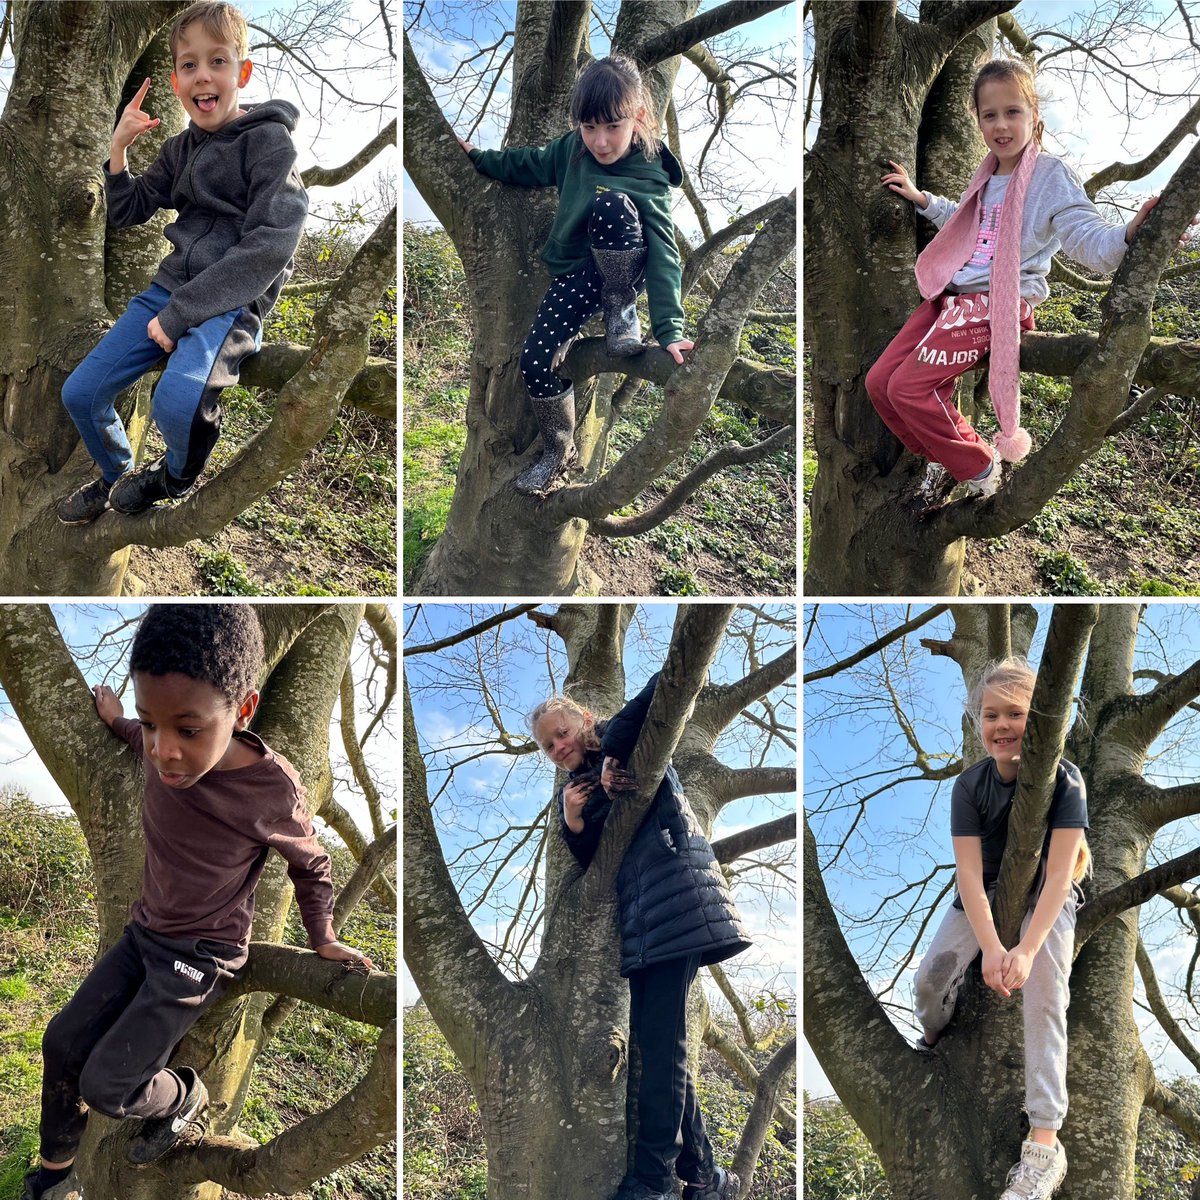 We are Forest Schoolers, of course we are going to climb the tree! @MrGarley @year3ijs @Year4IJS @Year6IJS